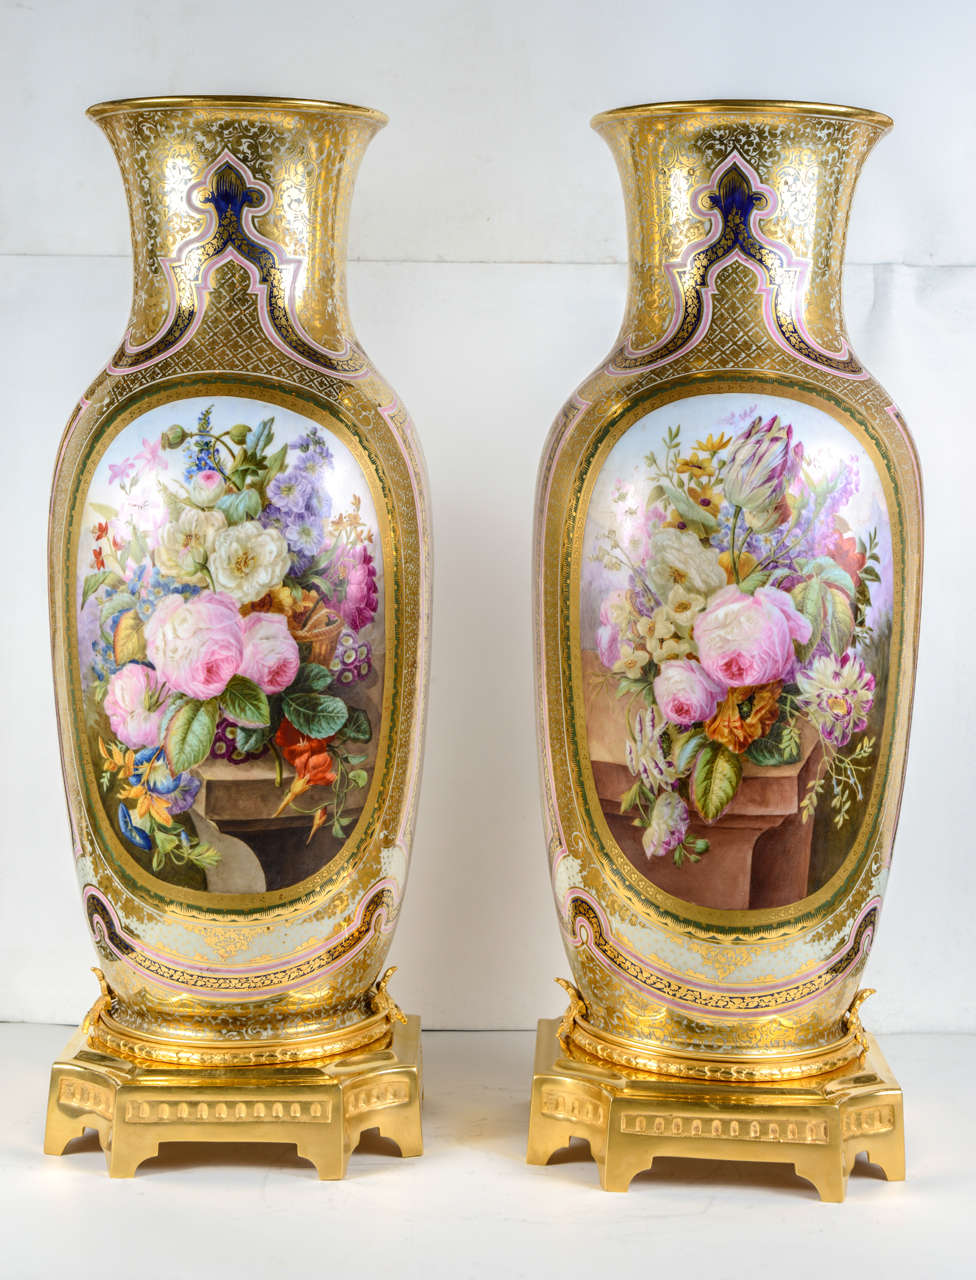 Pair of vases resting on a gilded bronze base, porcelain of Bayeux finally decorated on two faces with colored flowers.